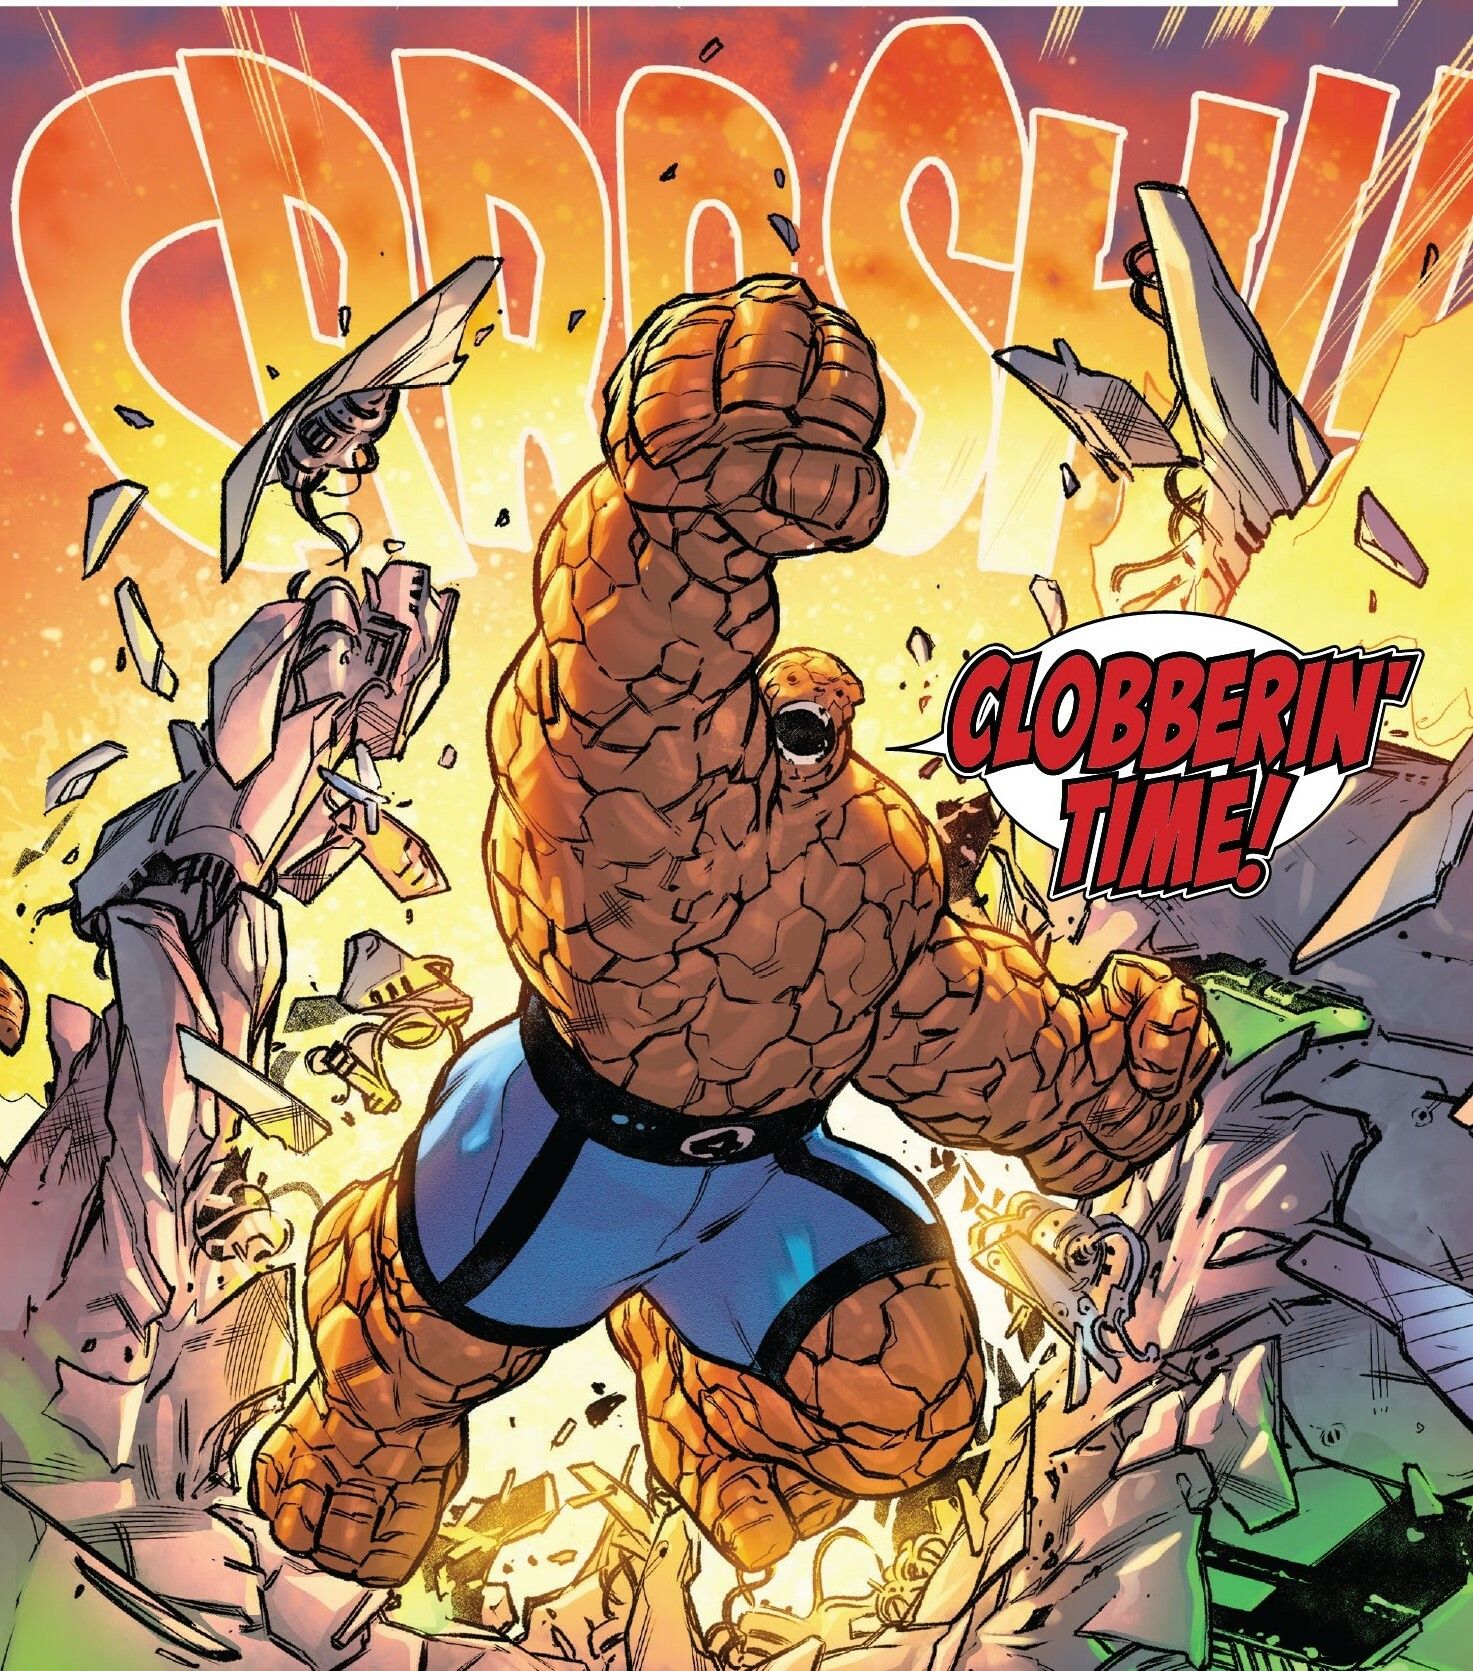 The Thing says it's clobbering time comic panel